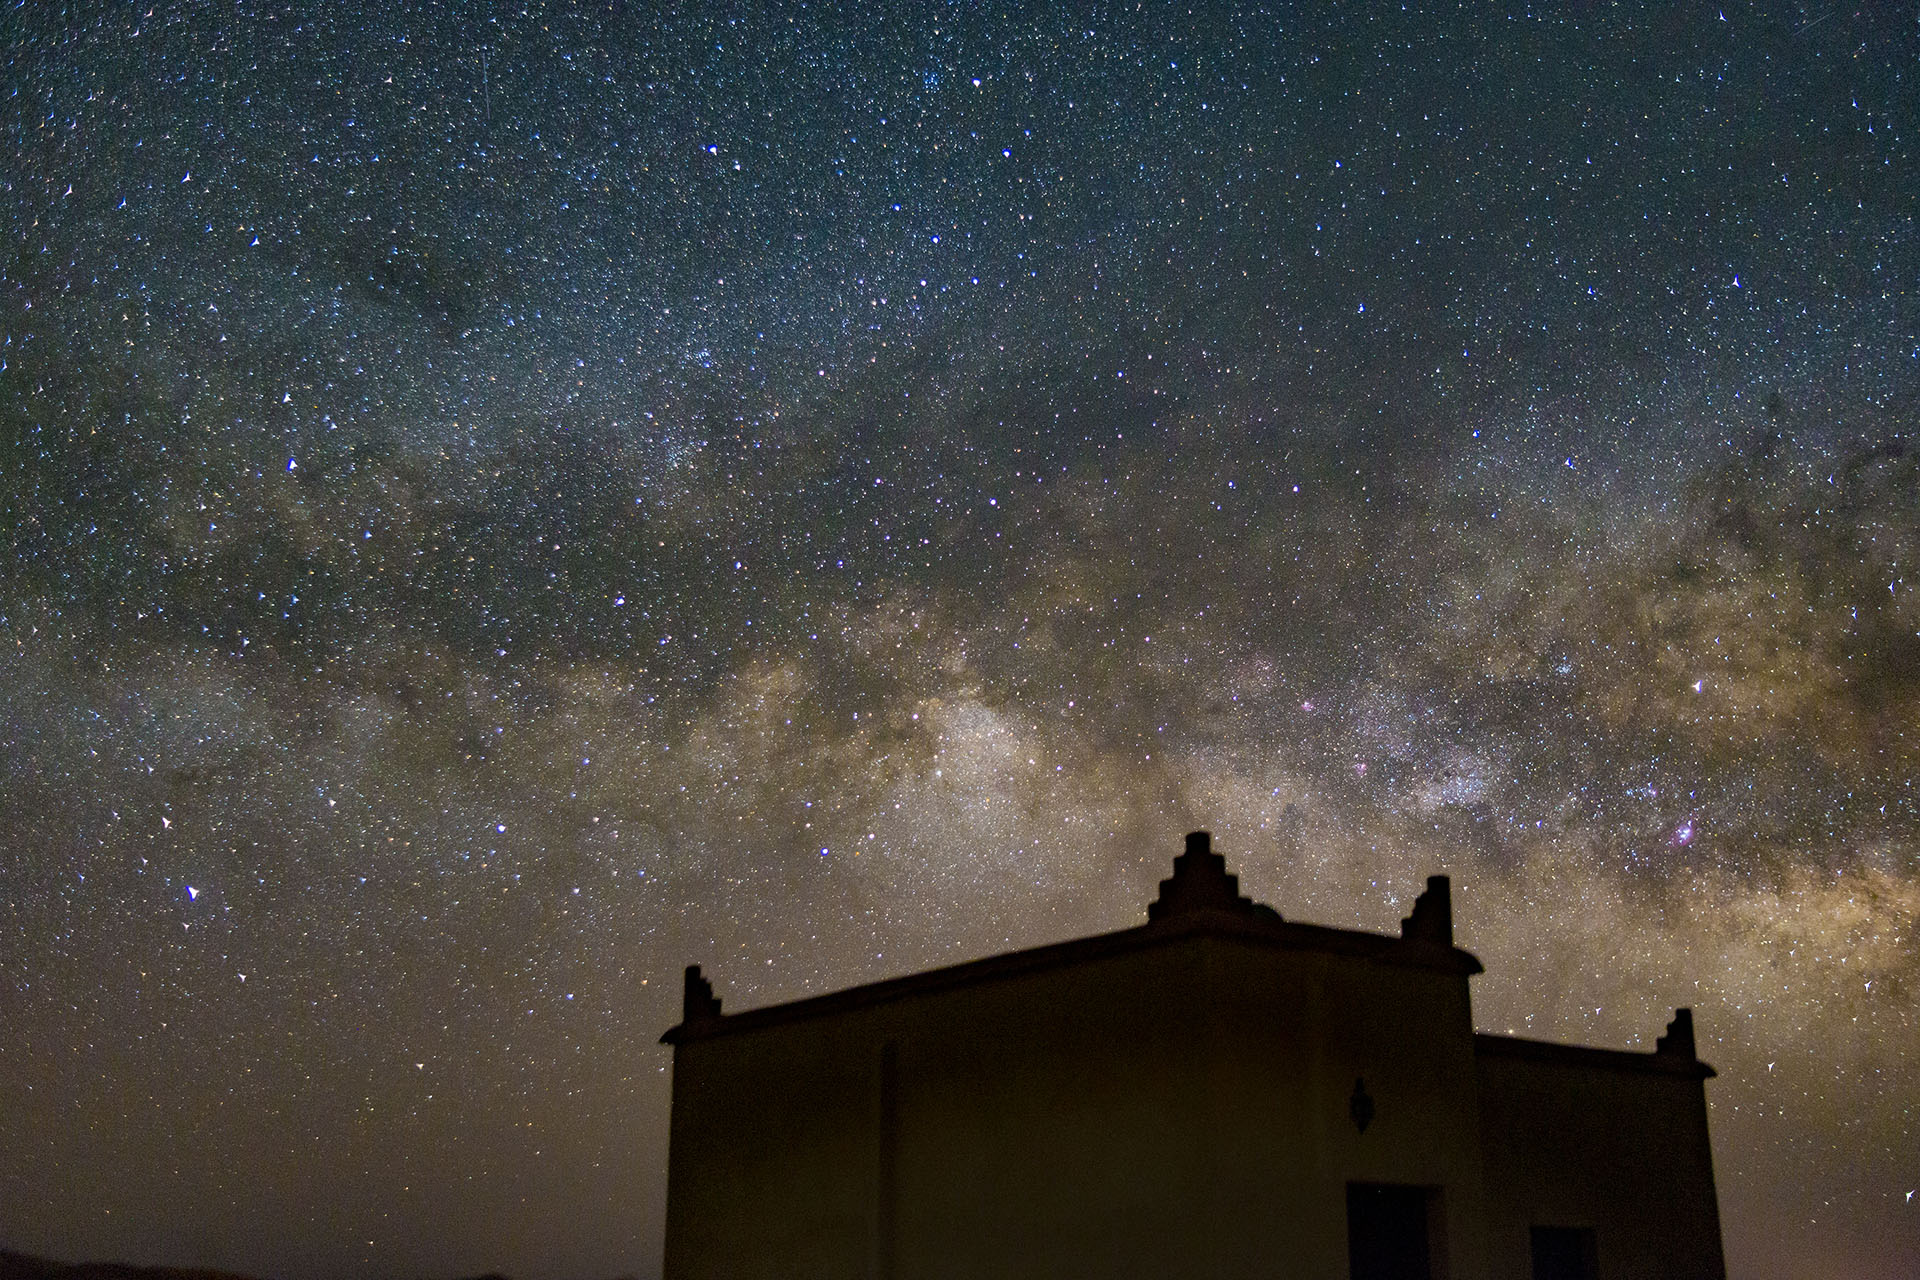 About Riad Da Hassan - Milky way over the riad - photo by Ezyê Moleda all rights reserved